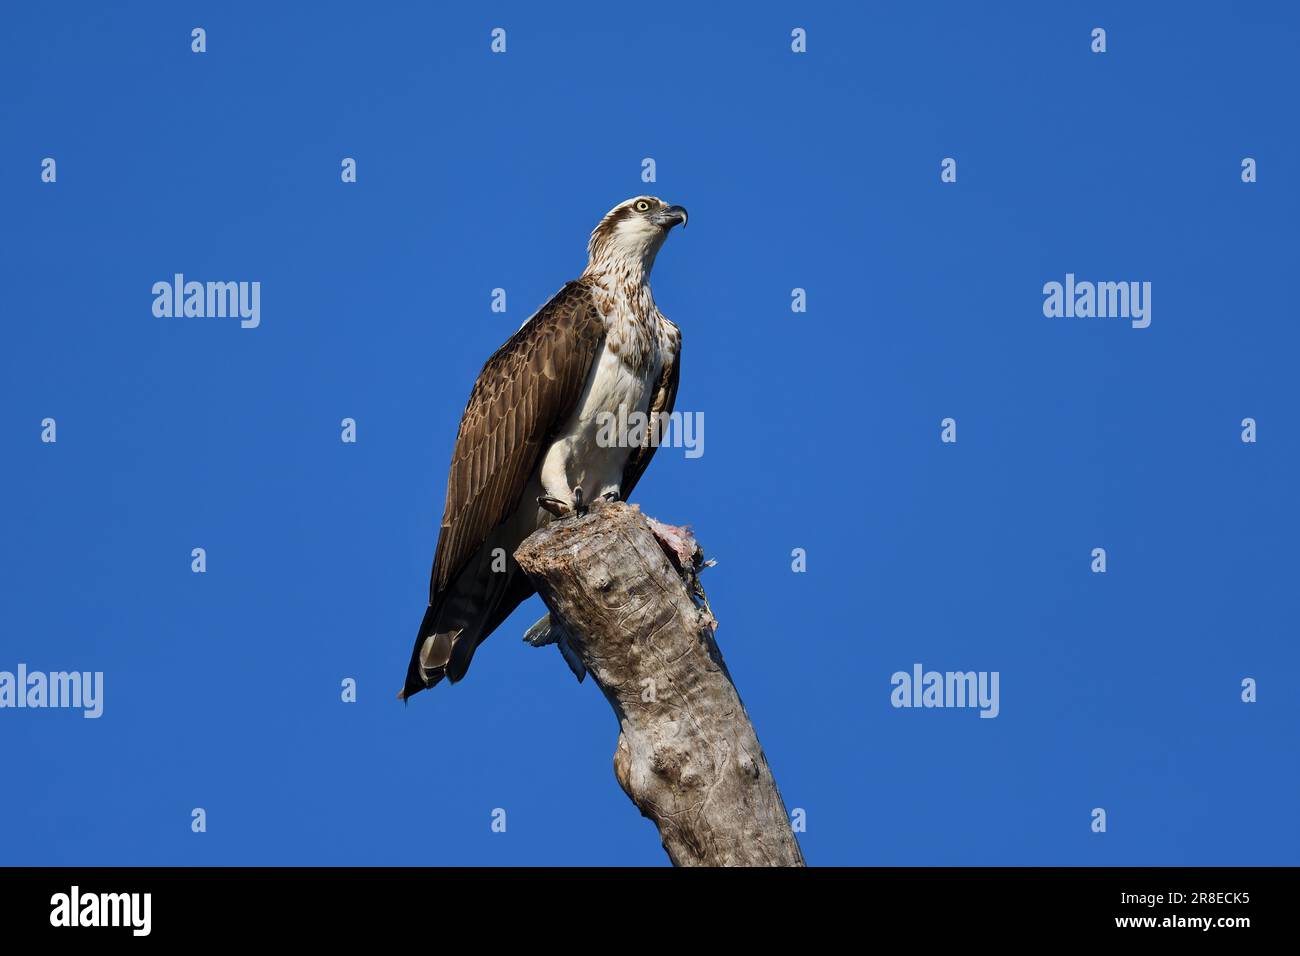 An Australian immature Osprey -Pandion haliaetus- bird perched on a tree stump guarding its freshly caught fish from other birds in morning sunlight Stock Photo